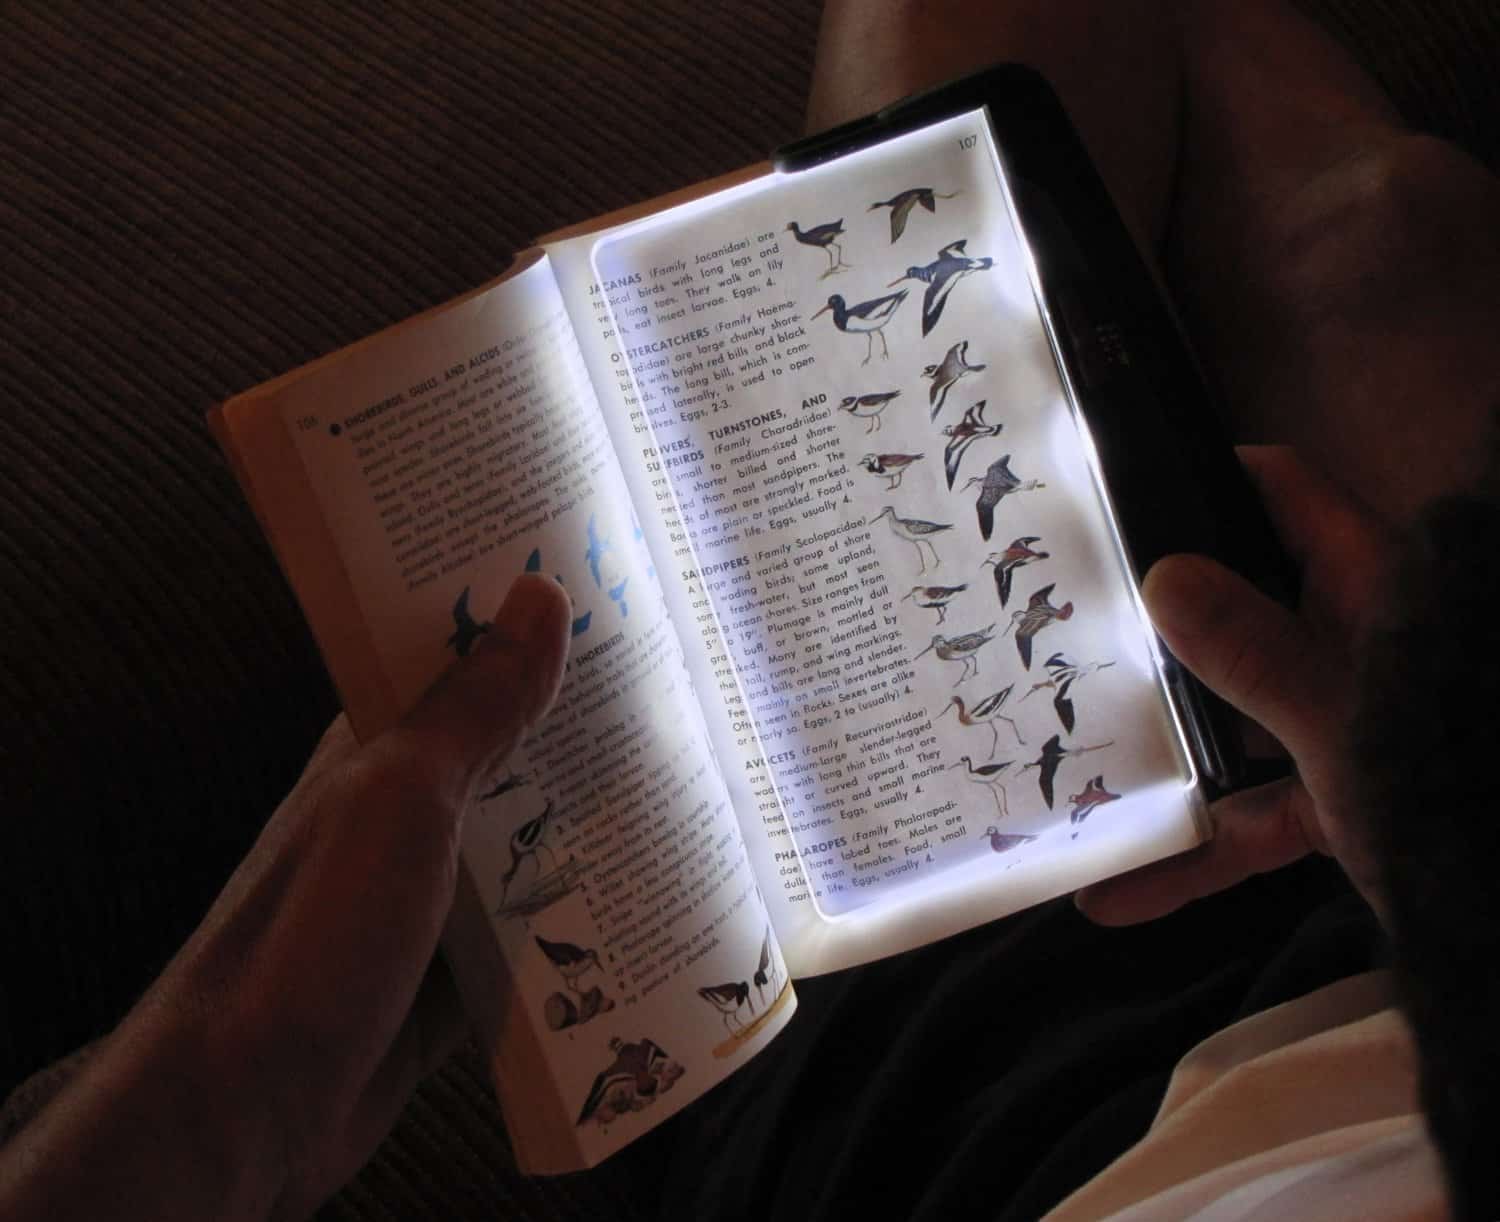 Carson PageGlow LED Reading Lights Buy Cool Gift for Dad